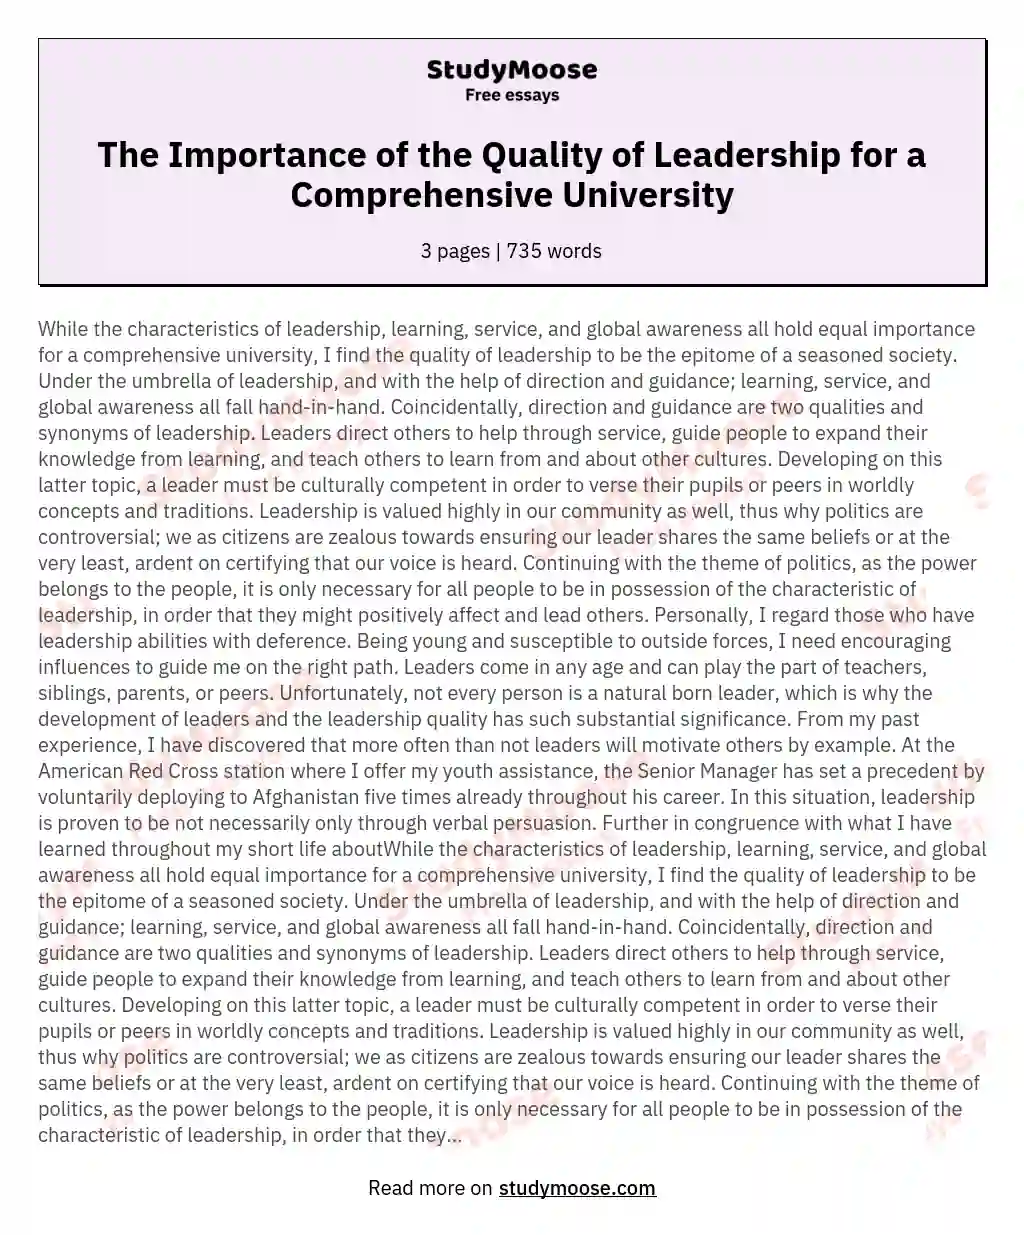 The Importance of the Quality of Leadership for a Comprehensive University essay